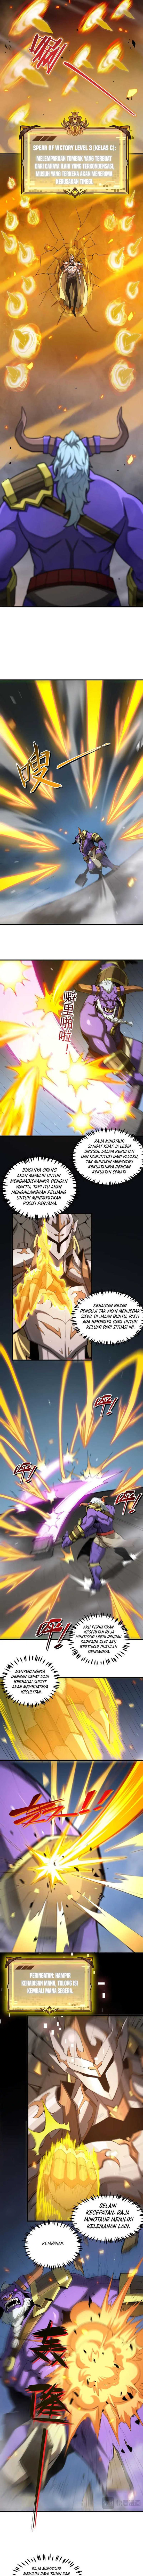 SSS-level Paladin Who Breaks All Logic Chapter 06